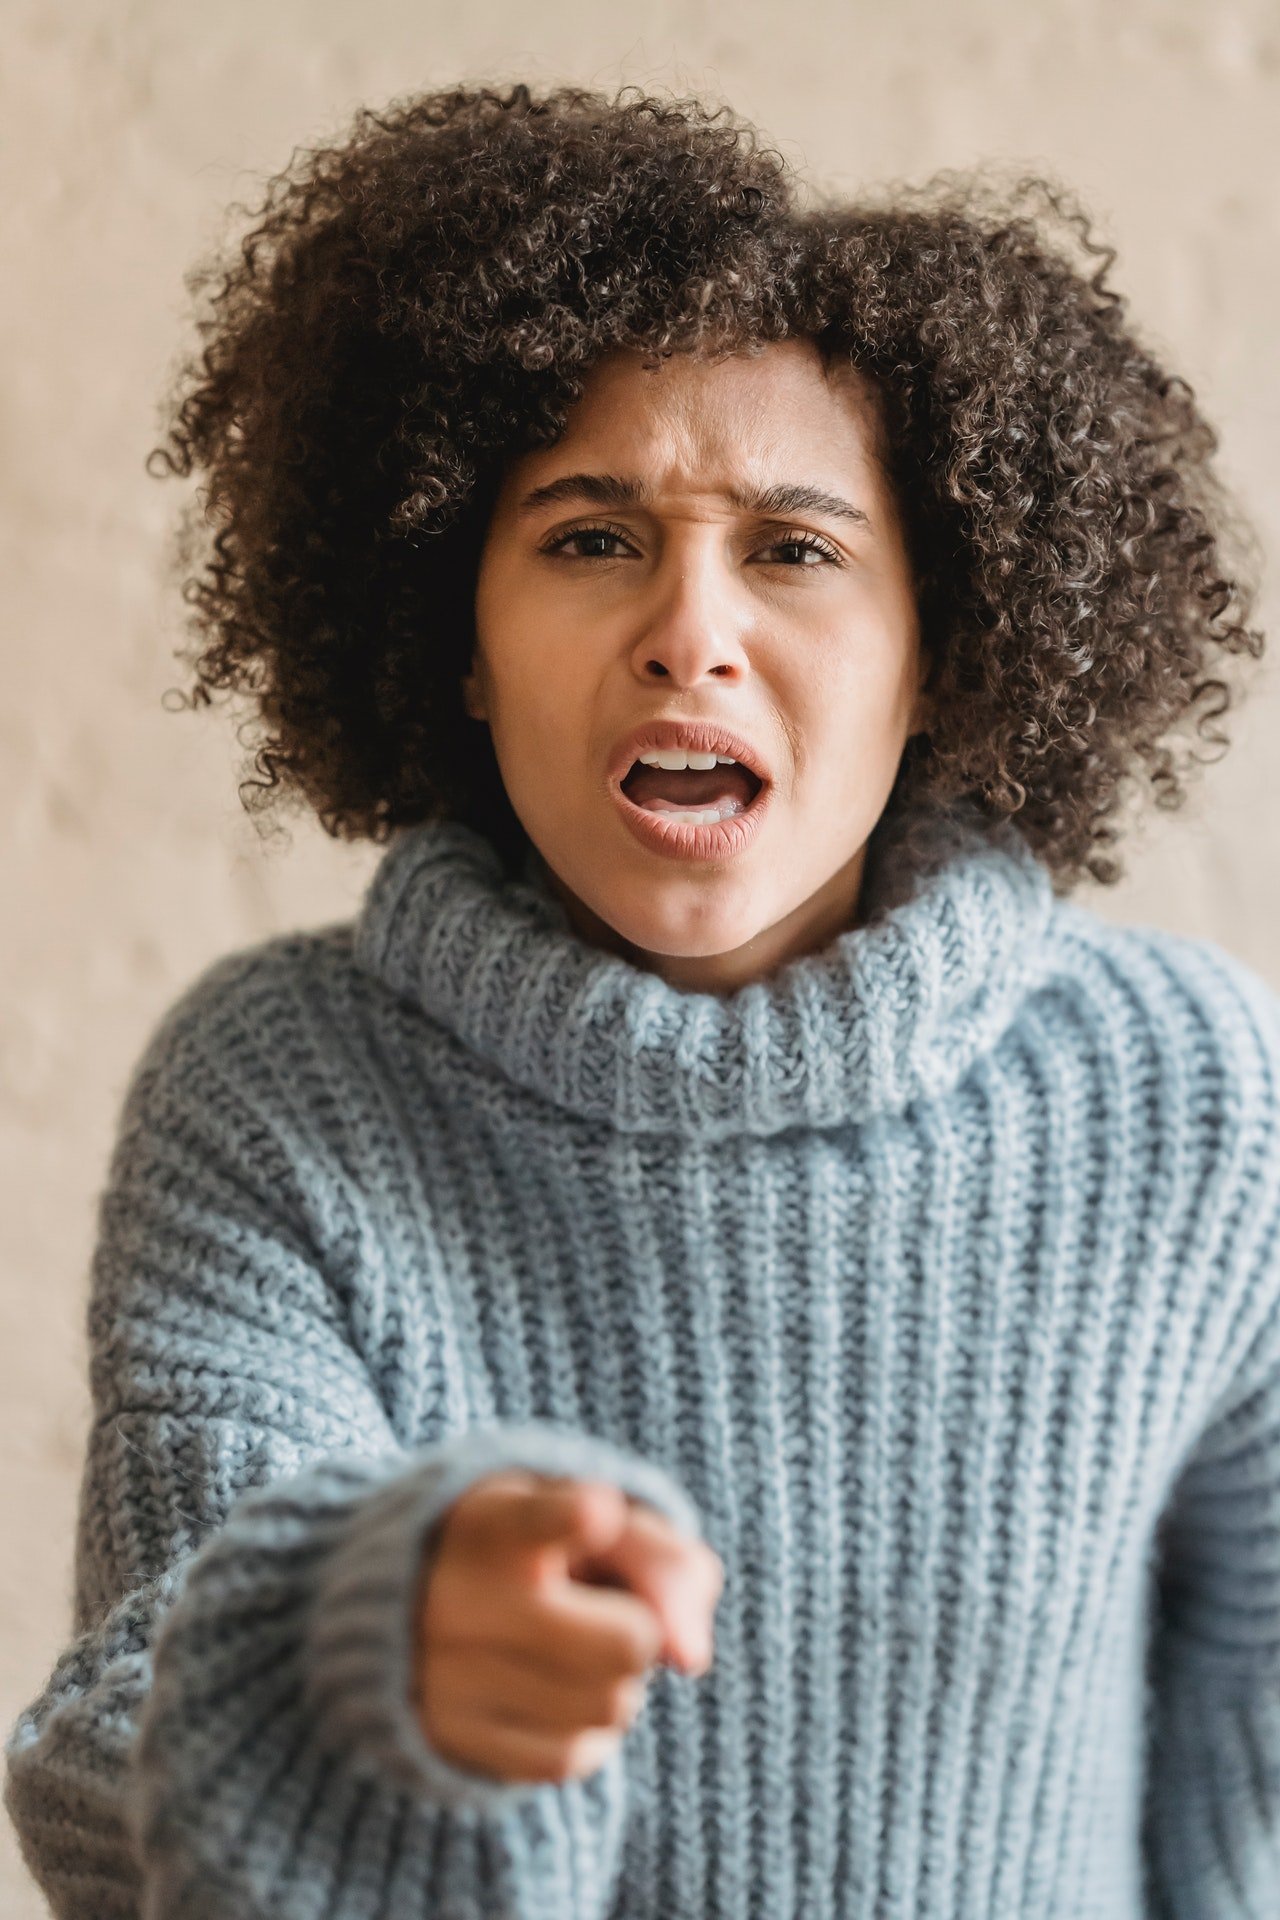 An apparently angry woman who appears to be disappointed. | Photo: Pexels